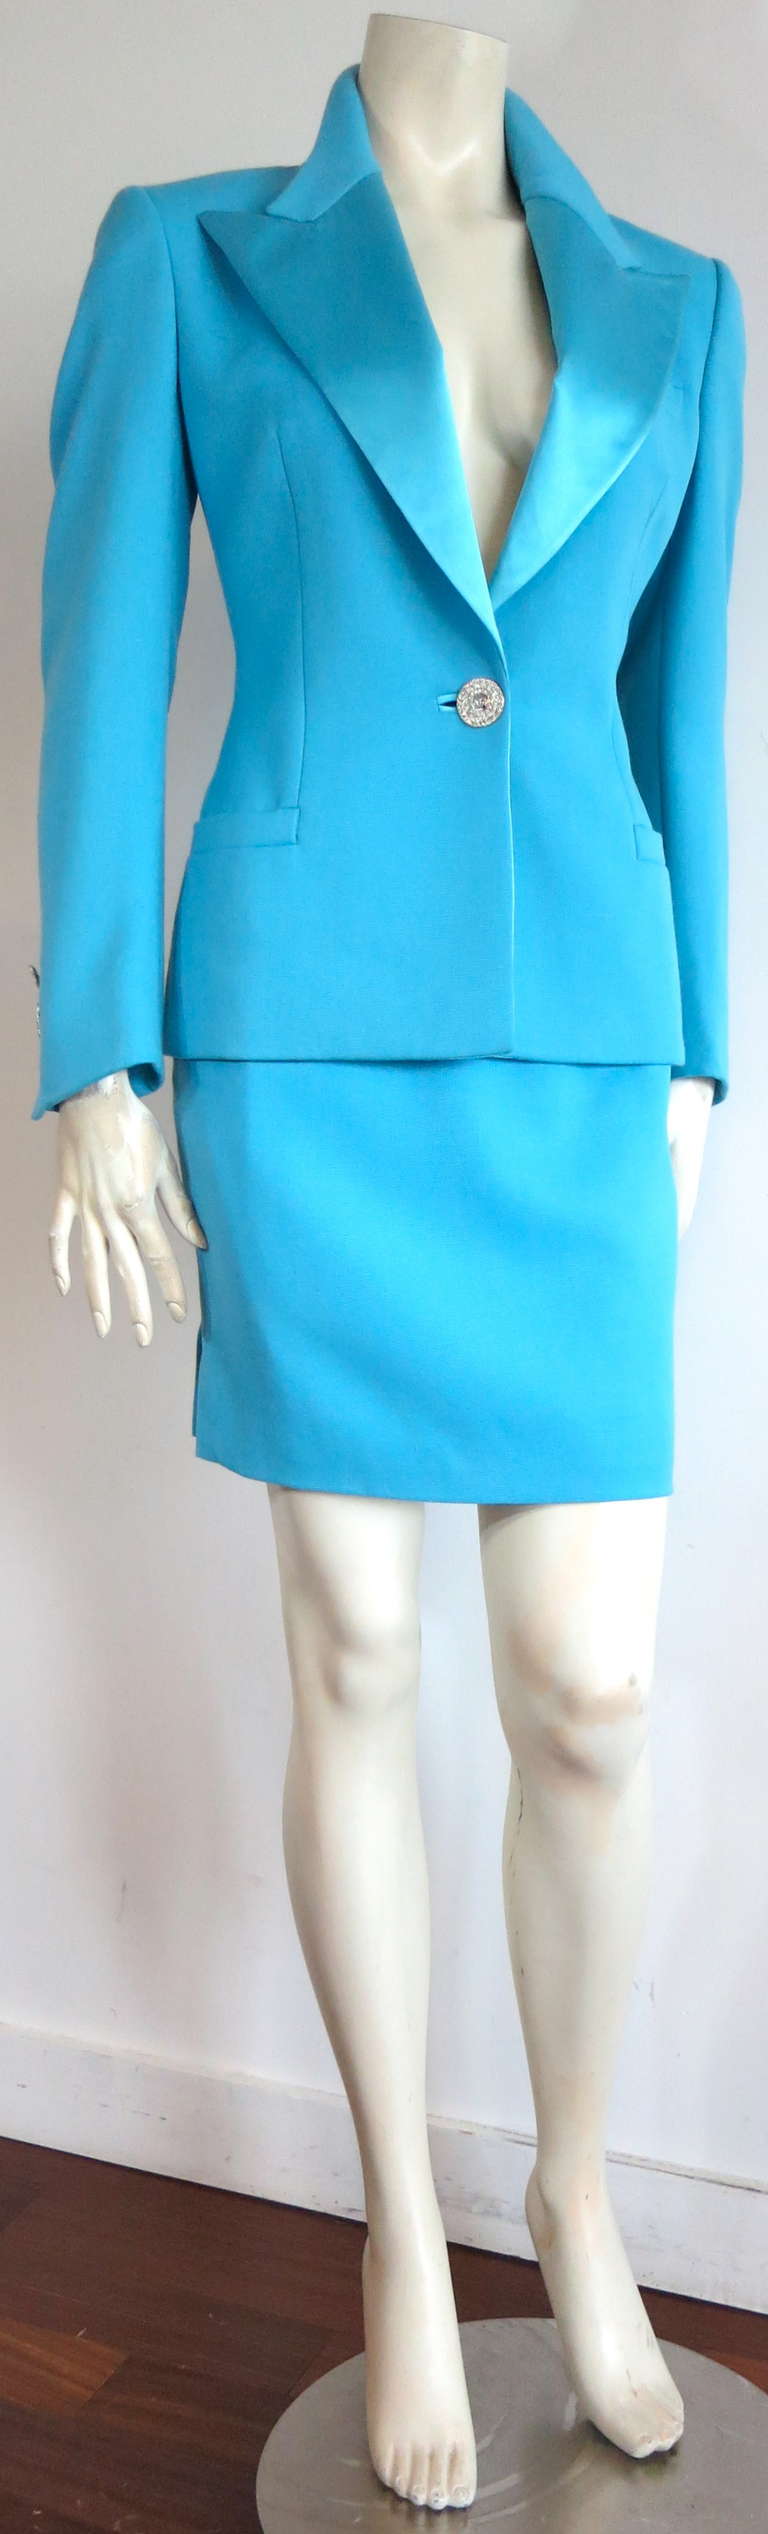 Women's 1990's GIANNI VERSACE COUTURE Turquoise skirt suit